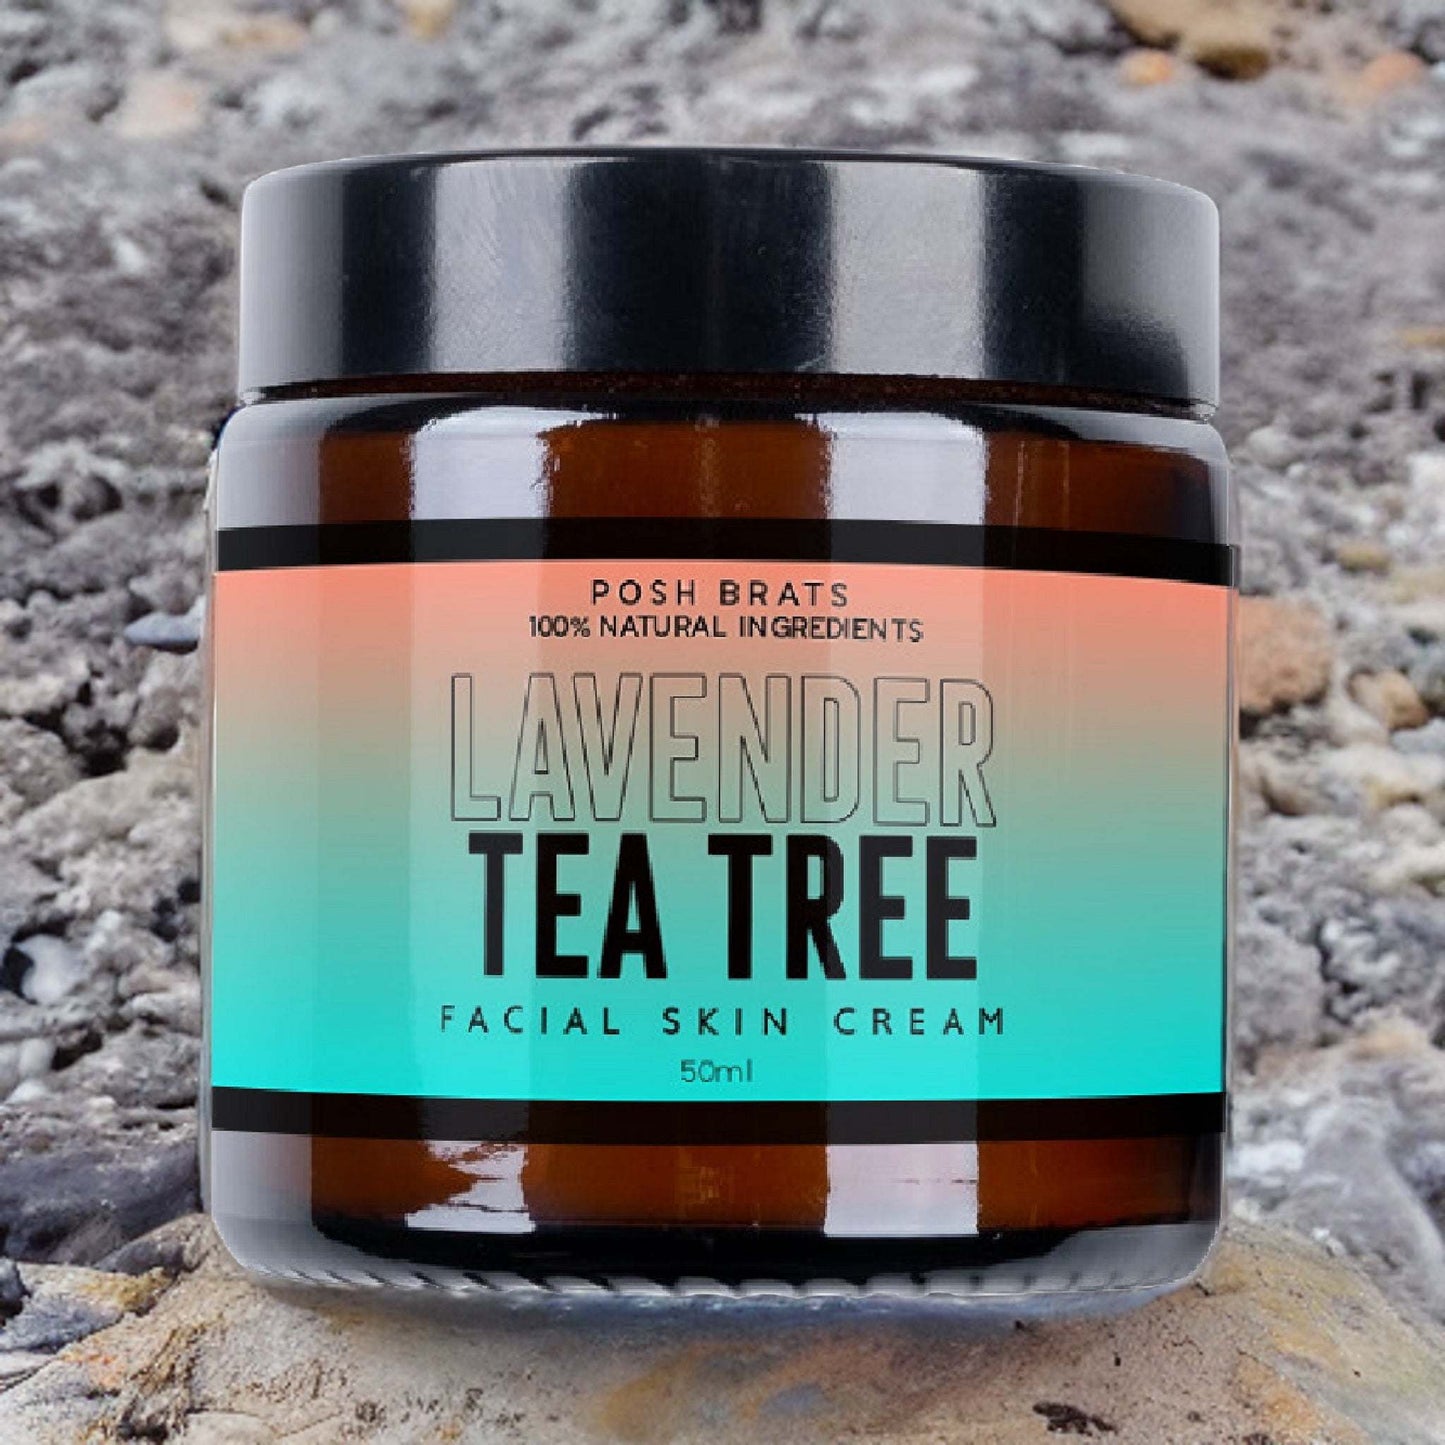 Lavender Tea Tree Aromatherapy Cream is your answer to clear skin. Try it now and feel the difference!